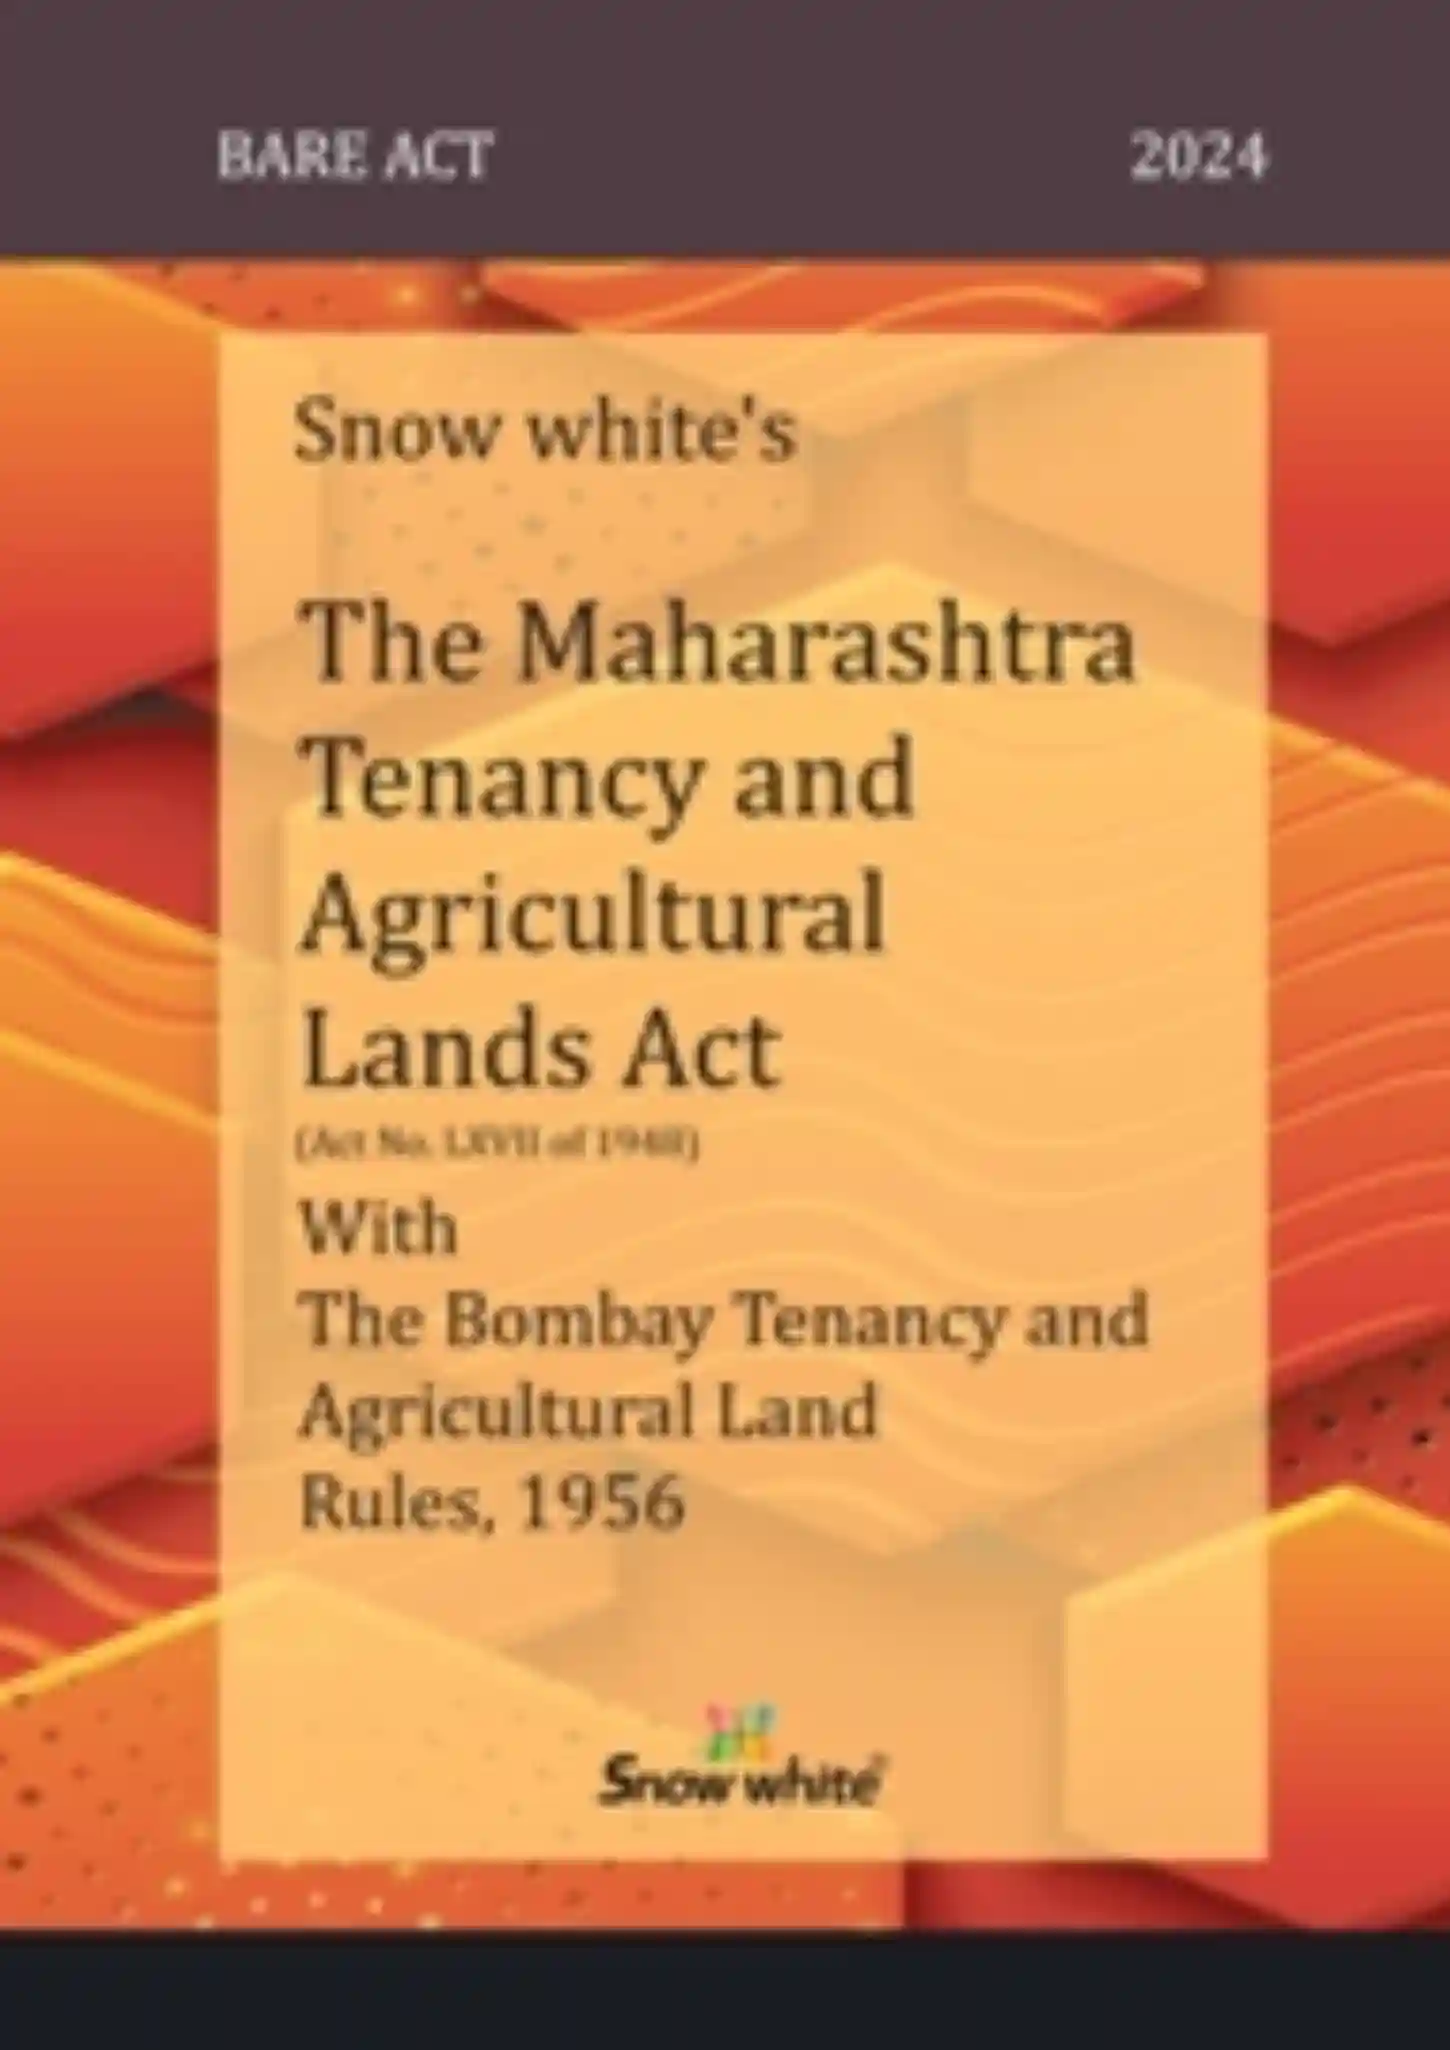 Snow White’s The Maharashtra Tenancy And Agricultural Lands Act With The Bombay Tenancy And Agricultural Land Rules, 1956